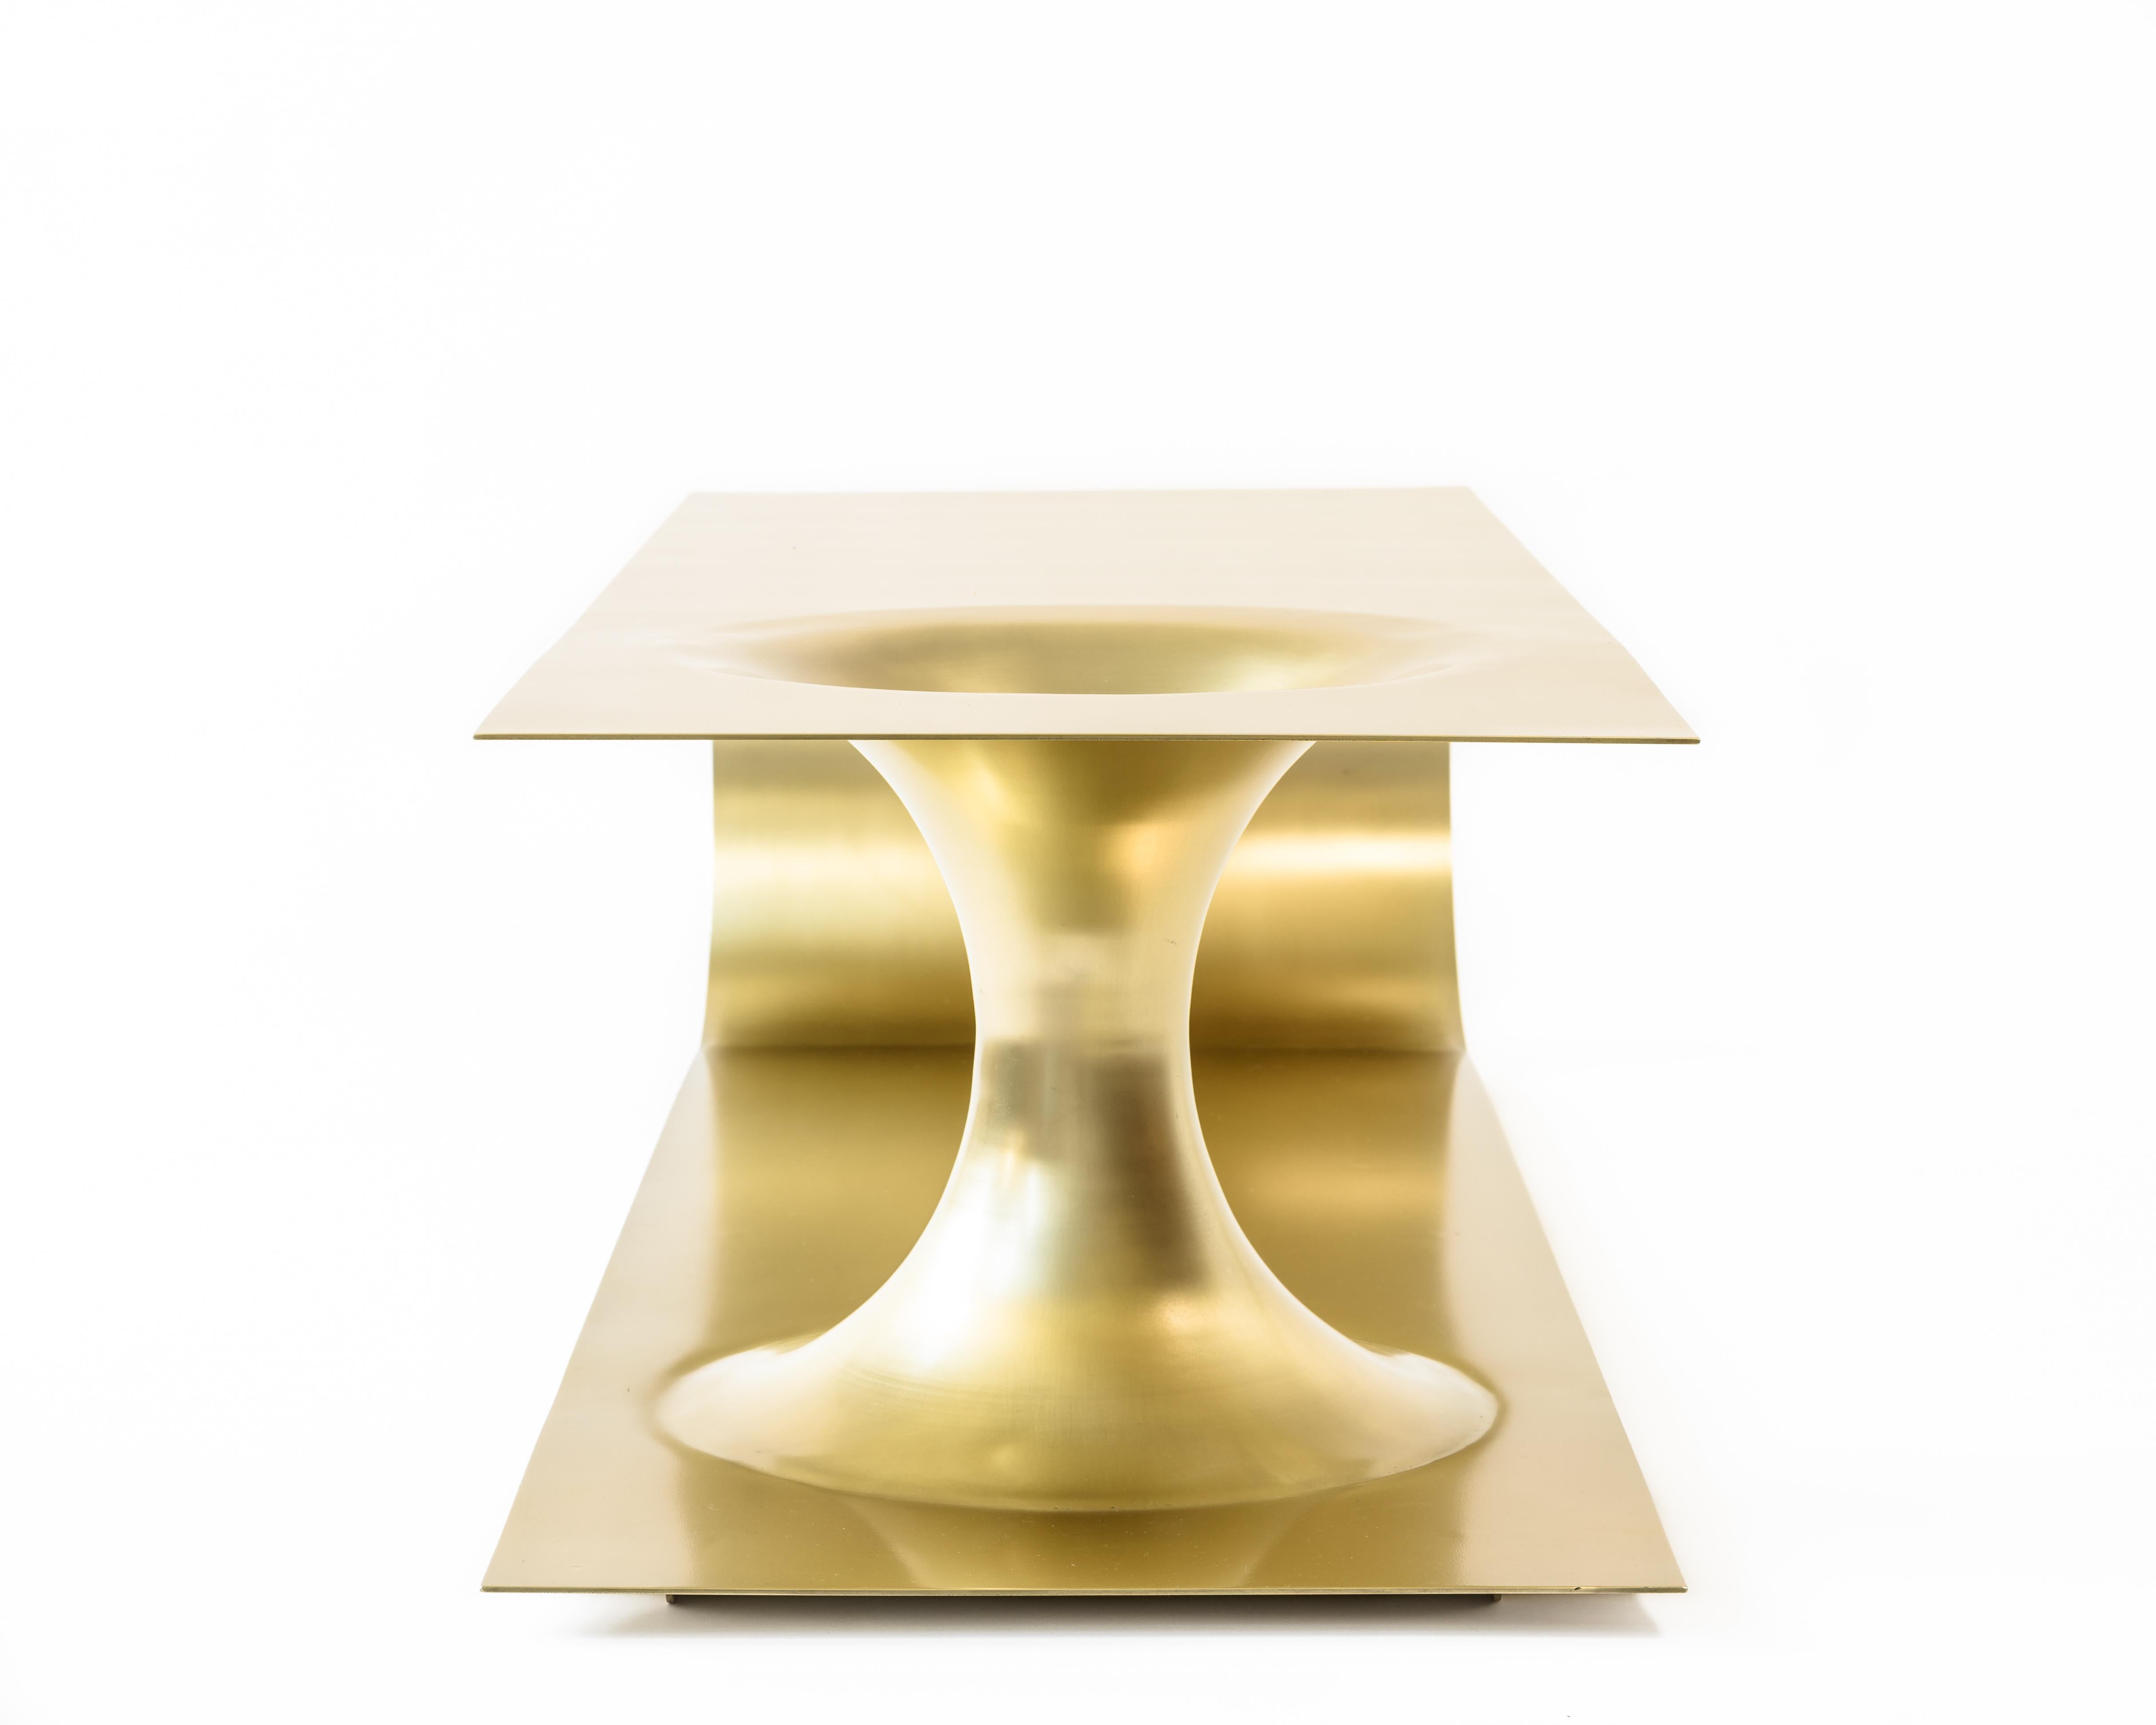 Burnished EÆ Wormhole Occasional Coffee Table in Polished Brass Plated Steel